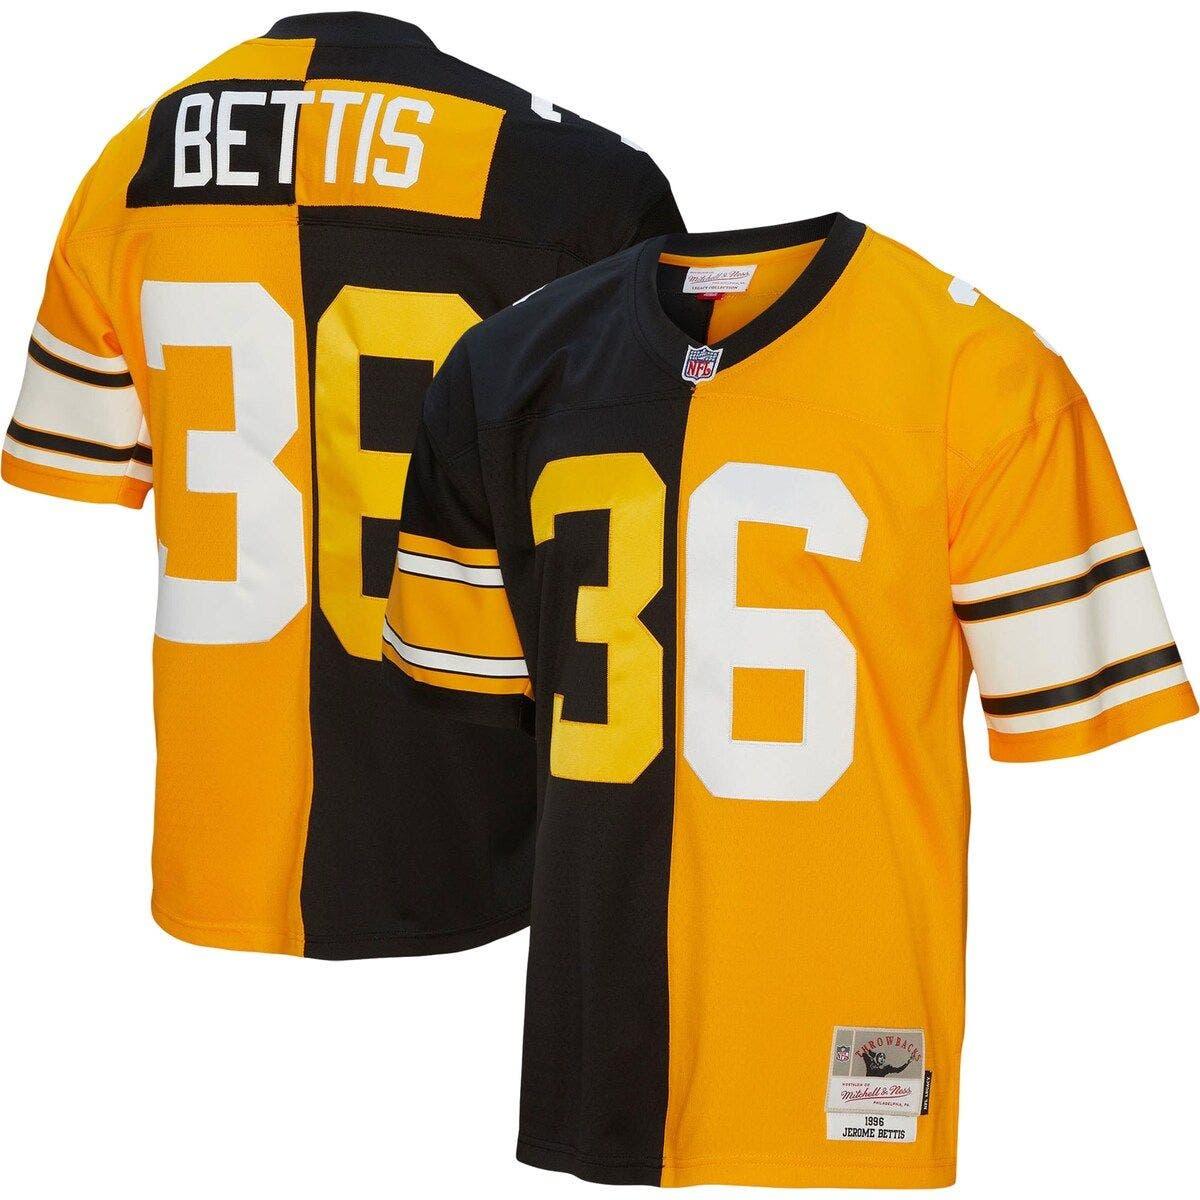 mitchell and ness franco harris jersey